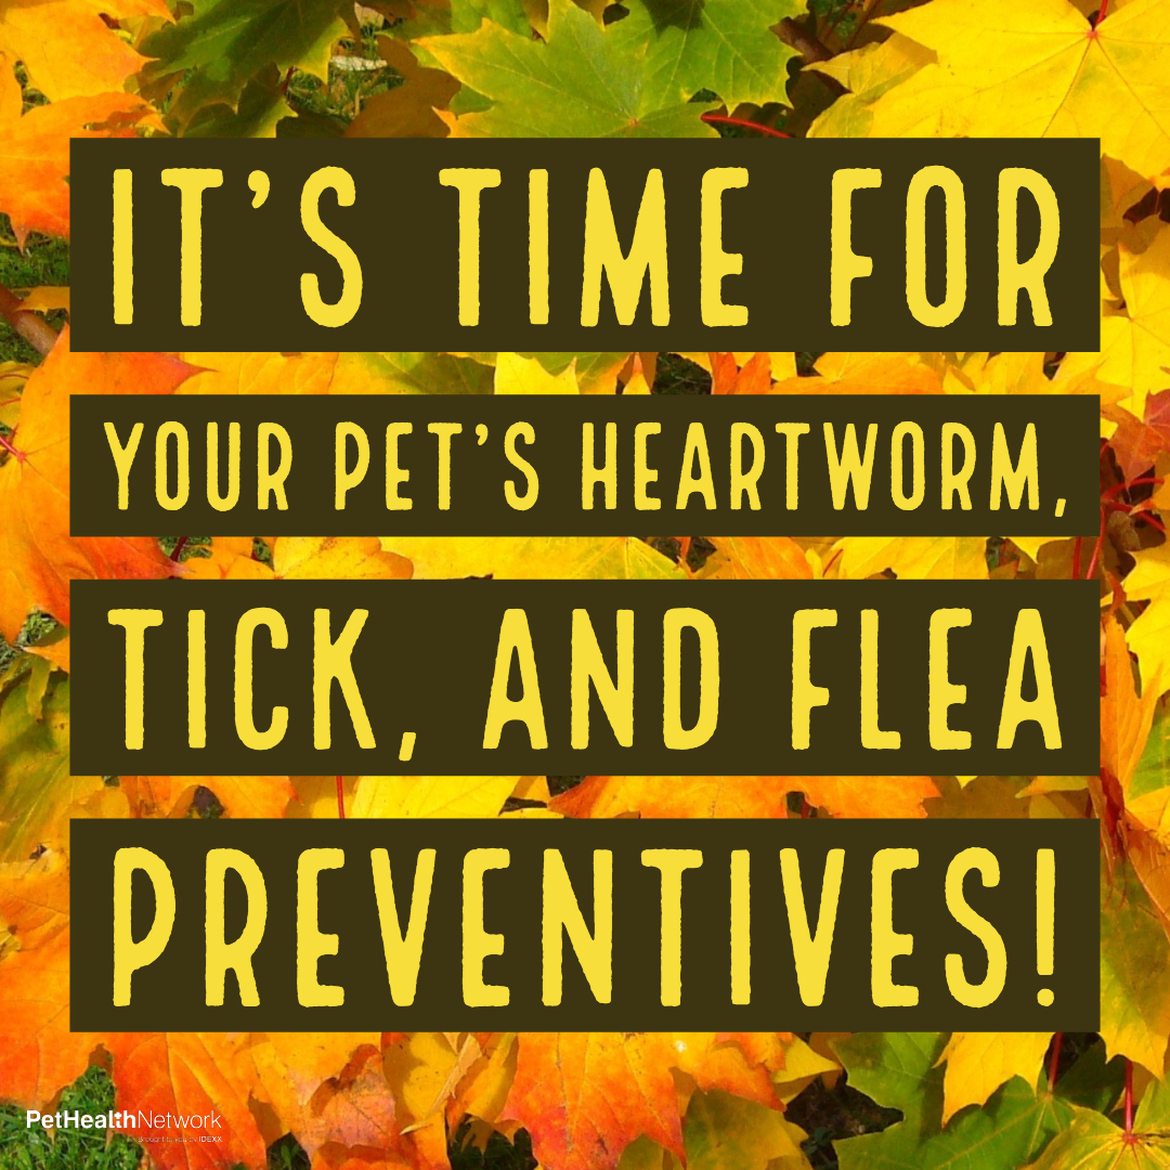 Social media for flea and tick monthly reminders.